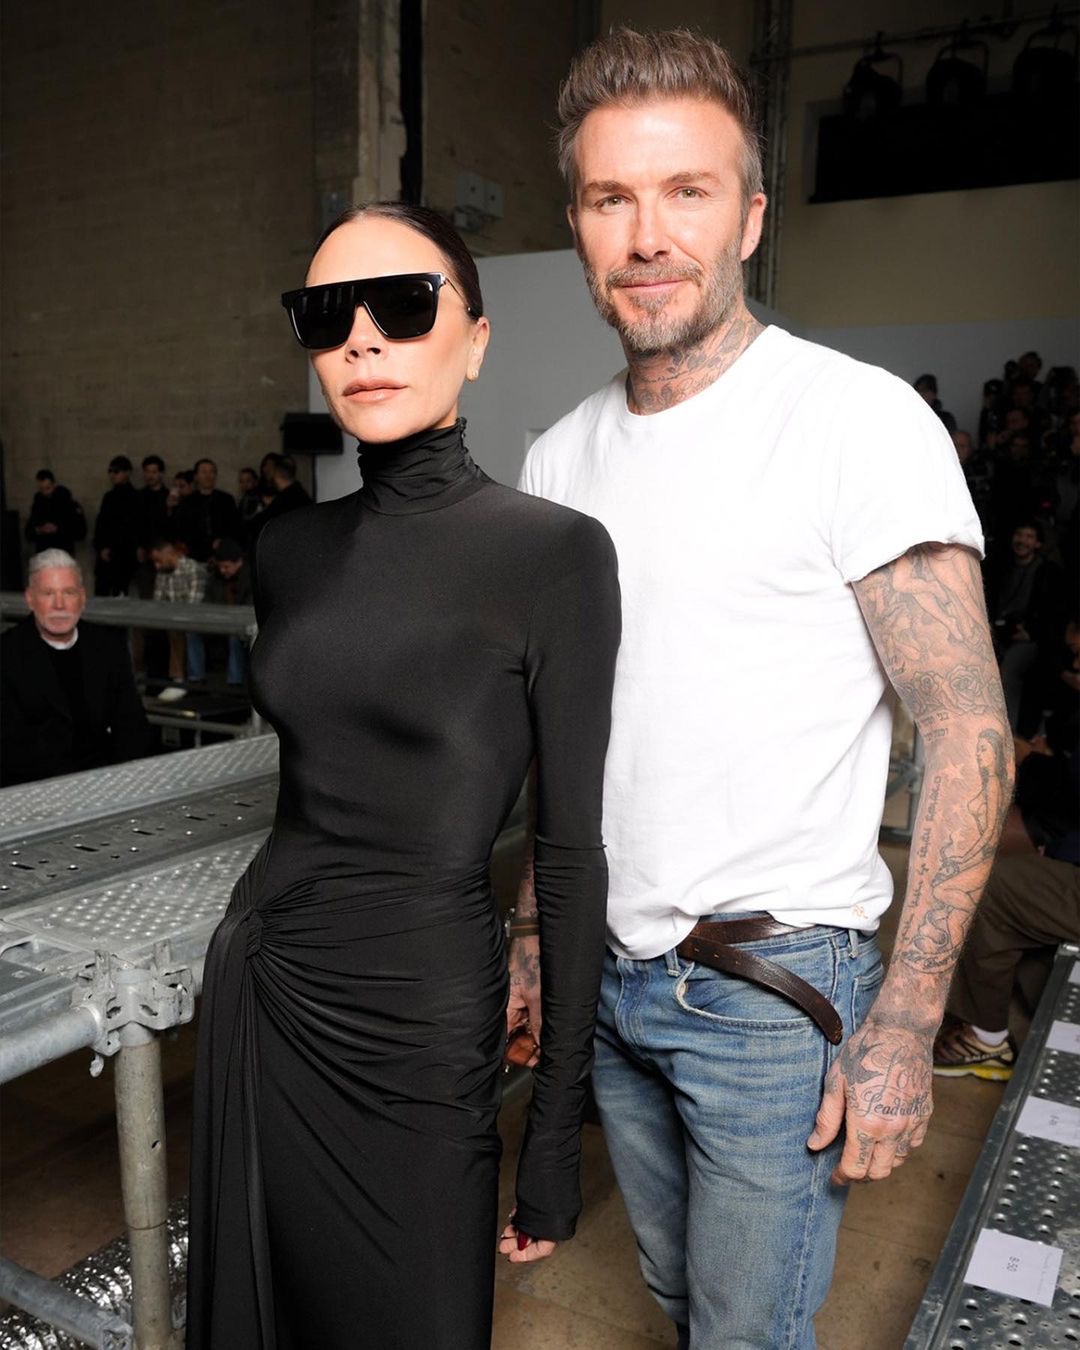 13 Less Known Facts about Victoria Beckham That May Surprise You ...